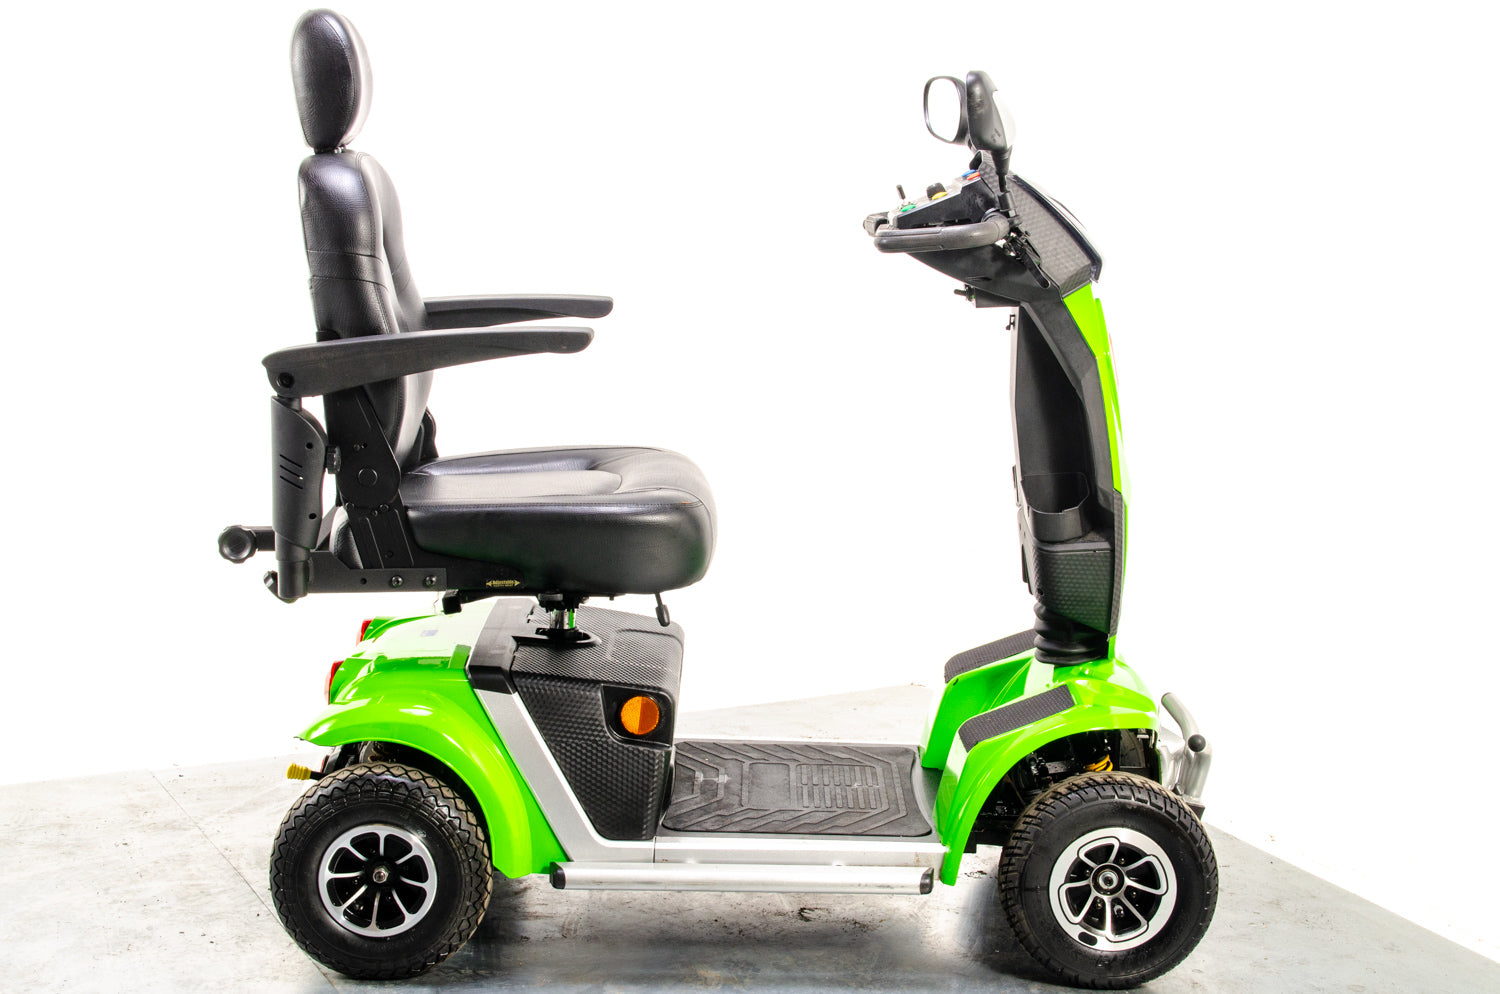 Monarch Vogue Sport Used Mobility Scooter 8mph Road Legal All Terrain Pneumatic Green